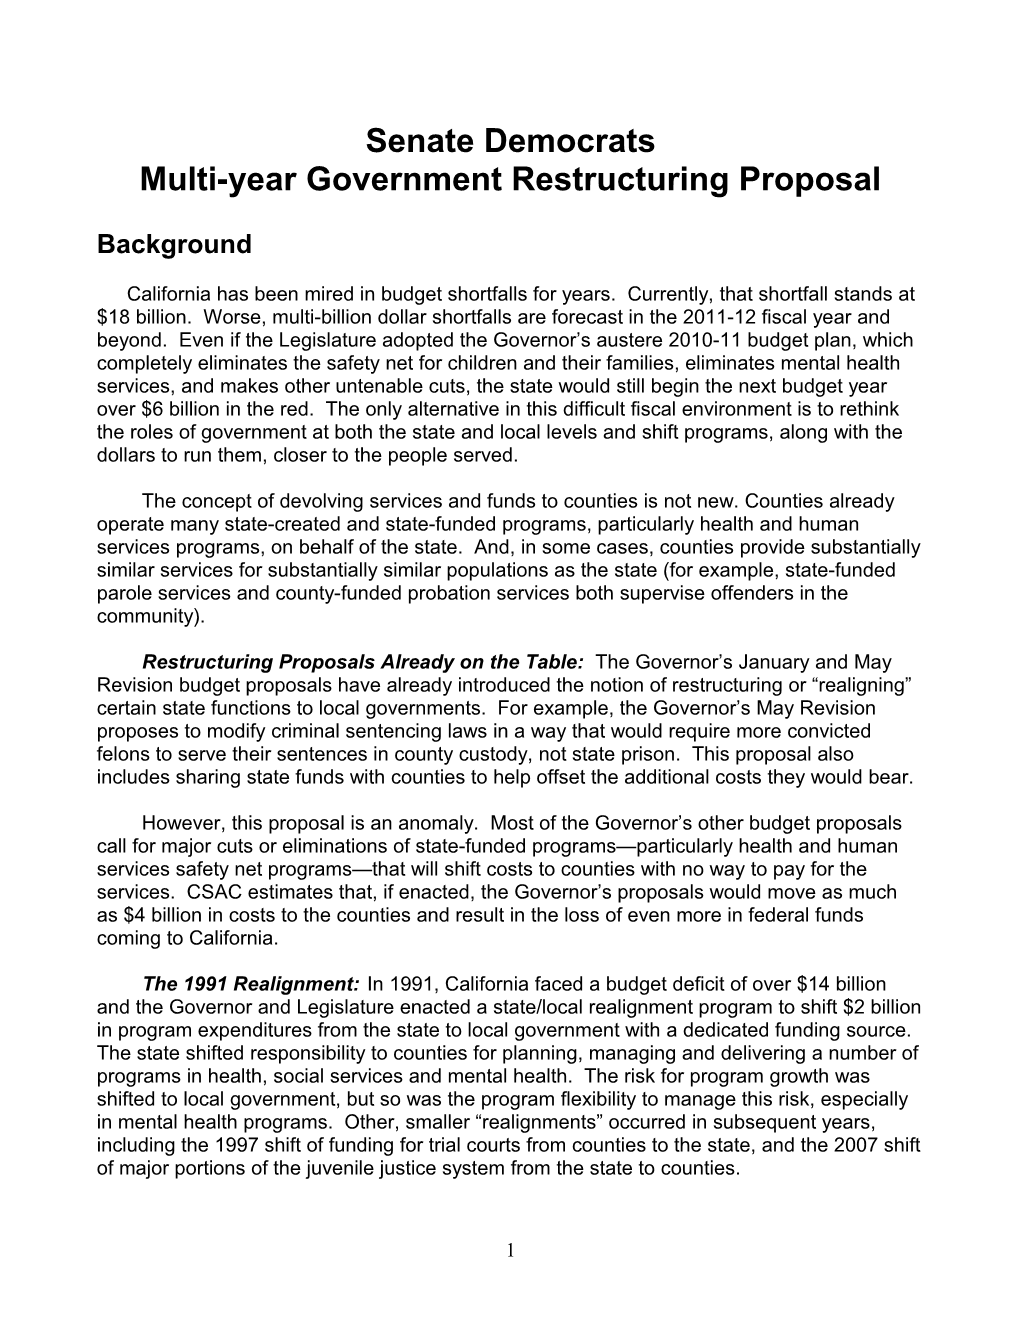 Multi-Year Government Restructuring Proposal